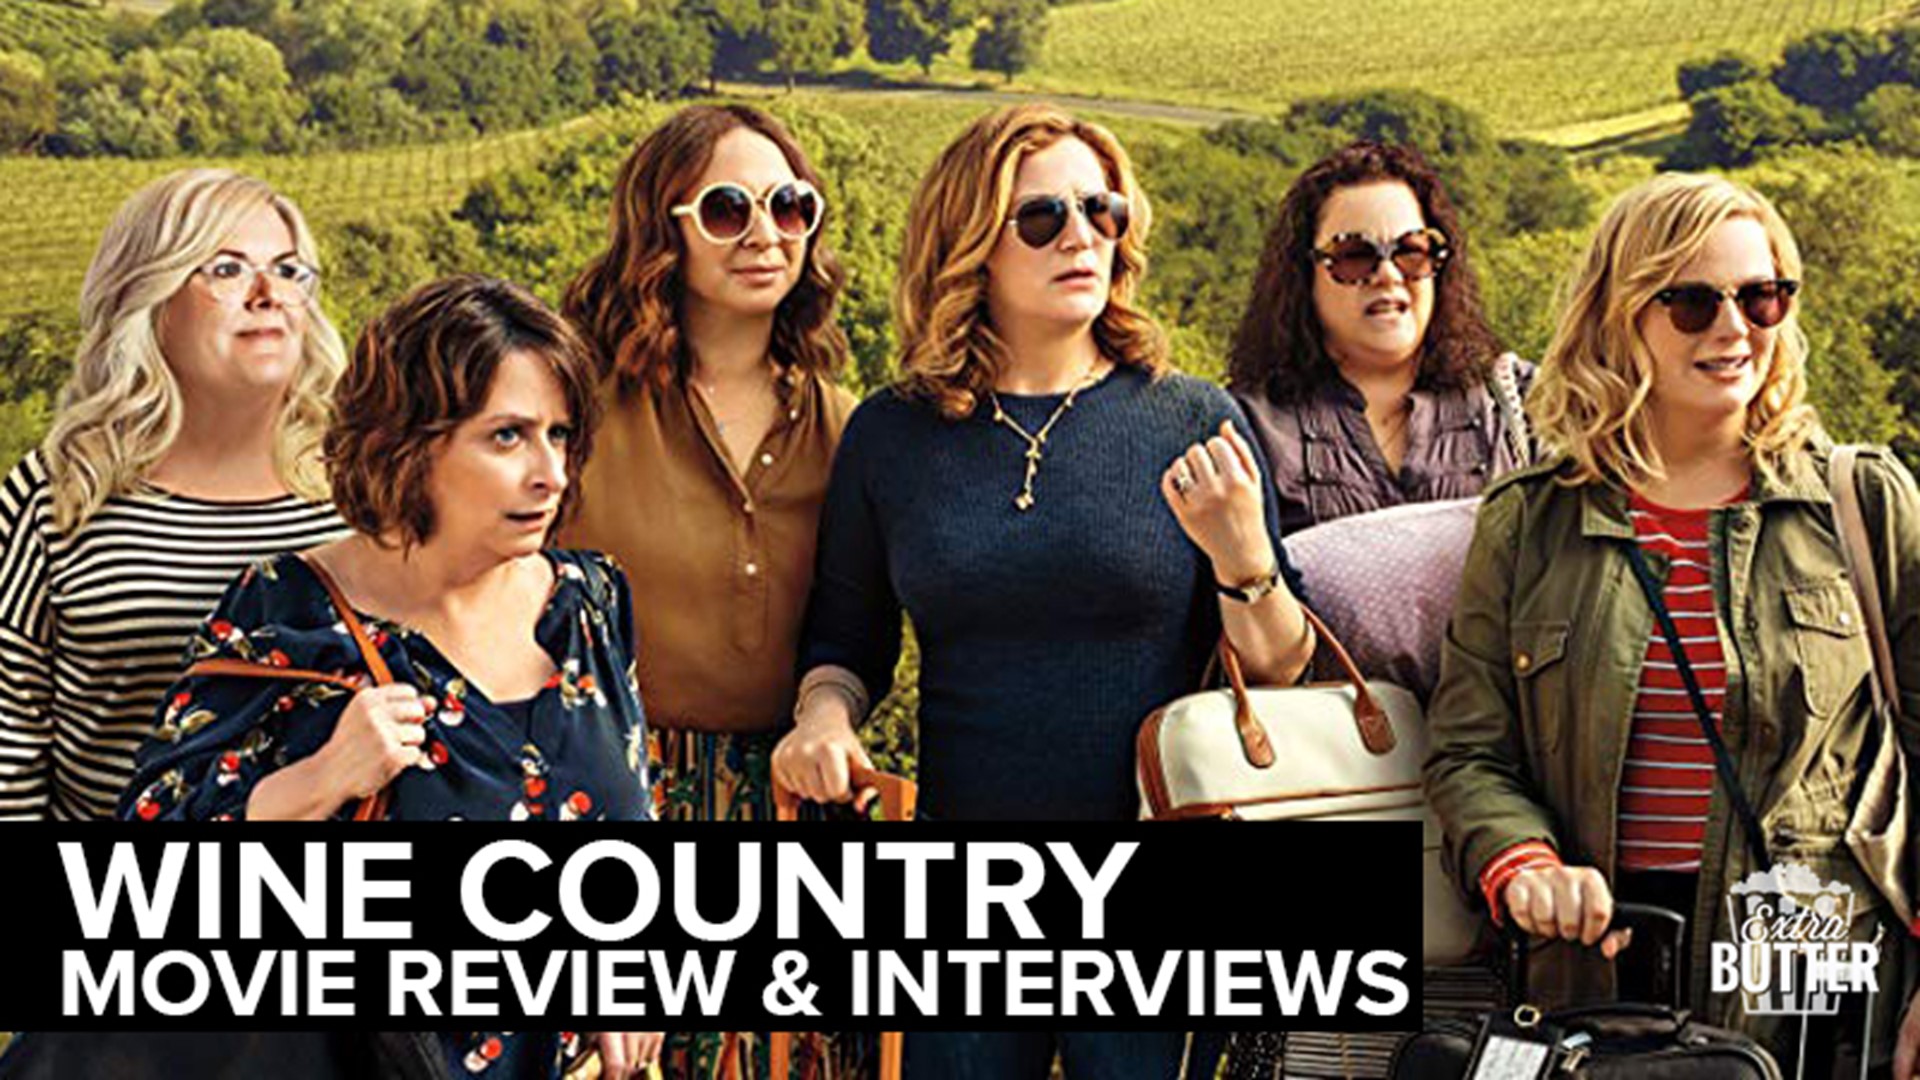 The new Netflix comedy 'Wine Country' stars SNL alum. Hear from Amy Poehler, who also directs, along with Tiny Fey, Maya Rudolph, Rachel Dratch, Ana Gasteyer and Paula Pell. (Episode 128 - 3/4)